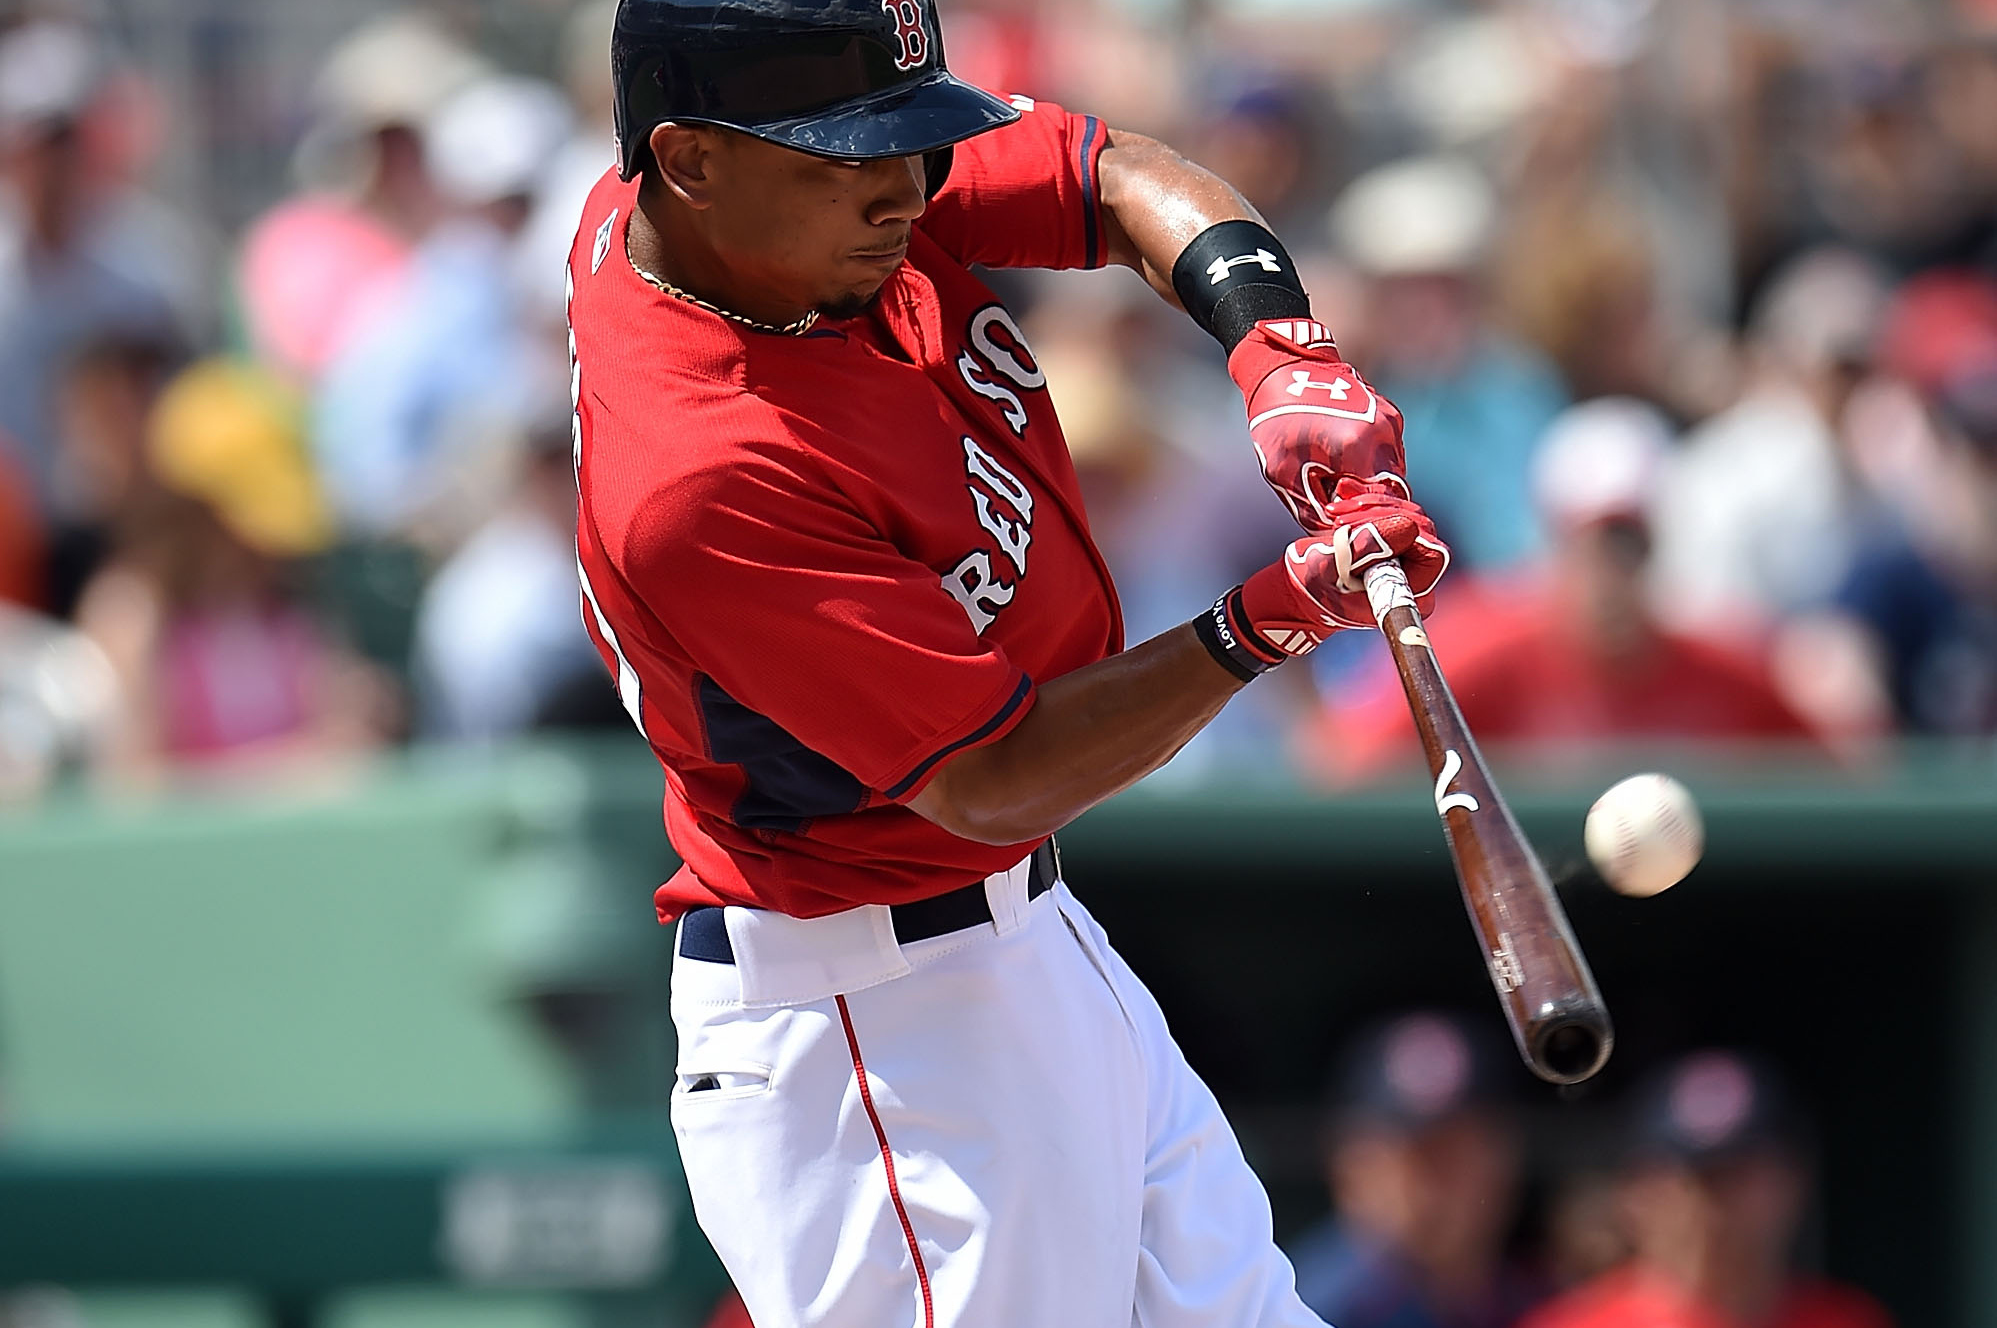 Red Sox outfielder Mookie Betts due for a dusting following home